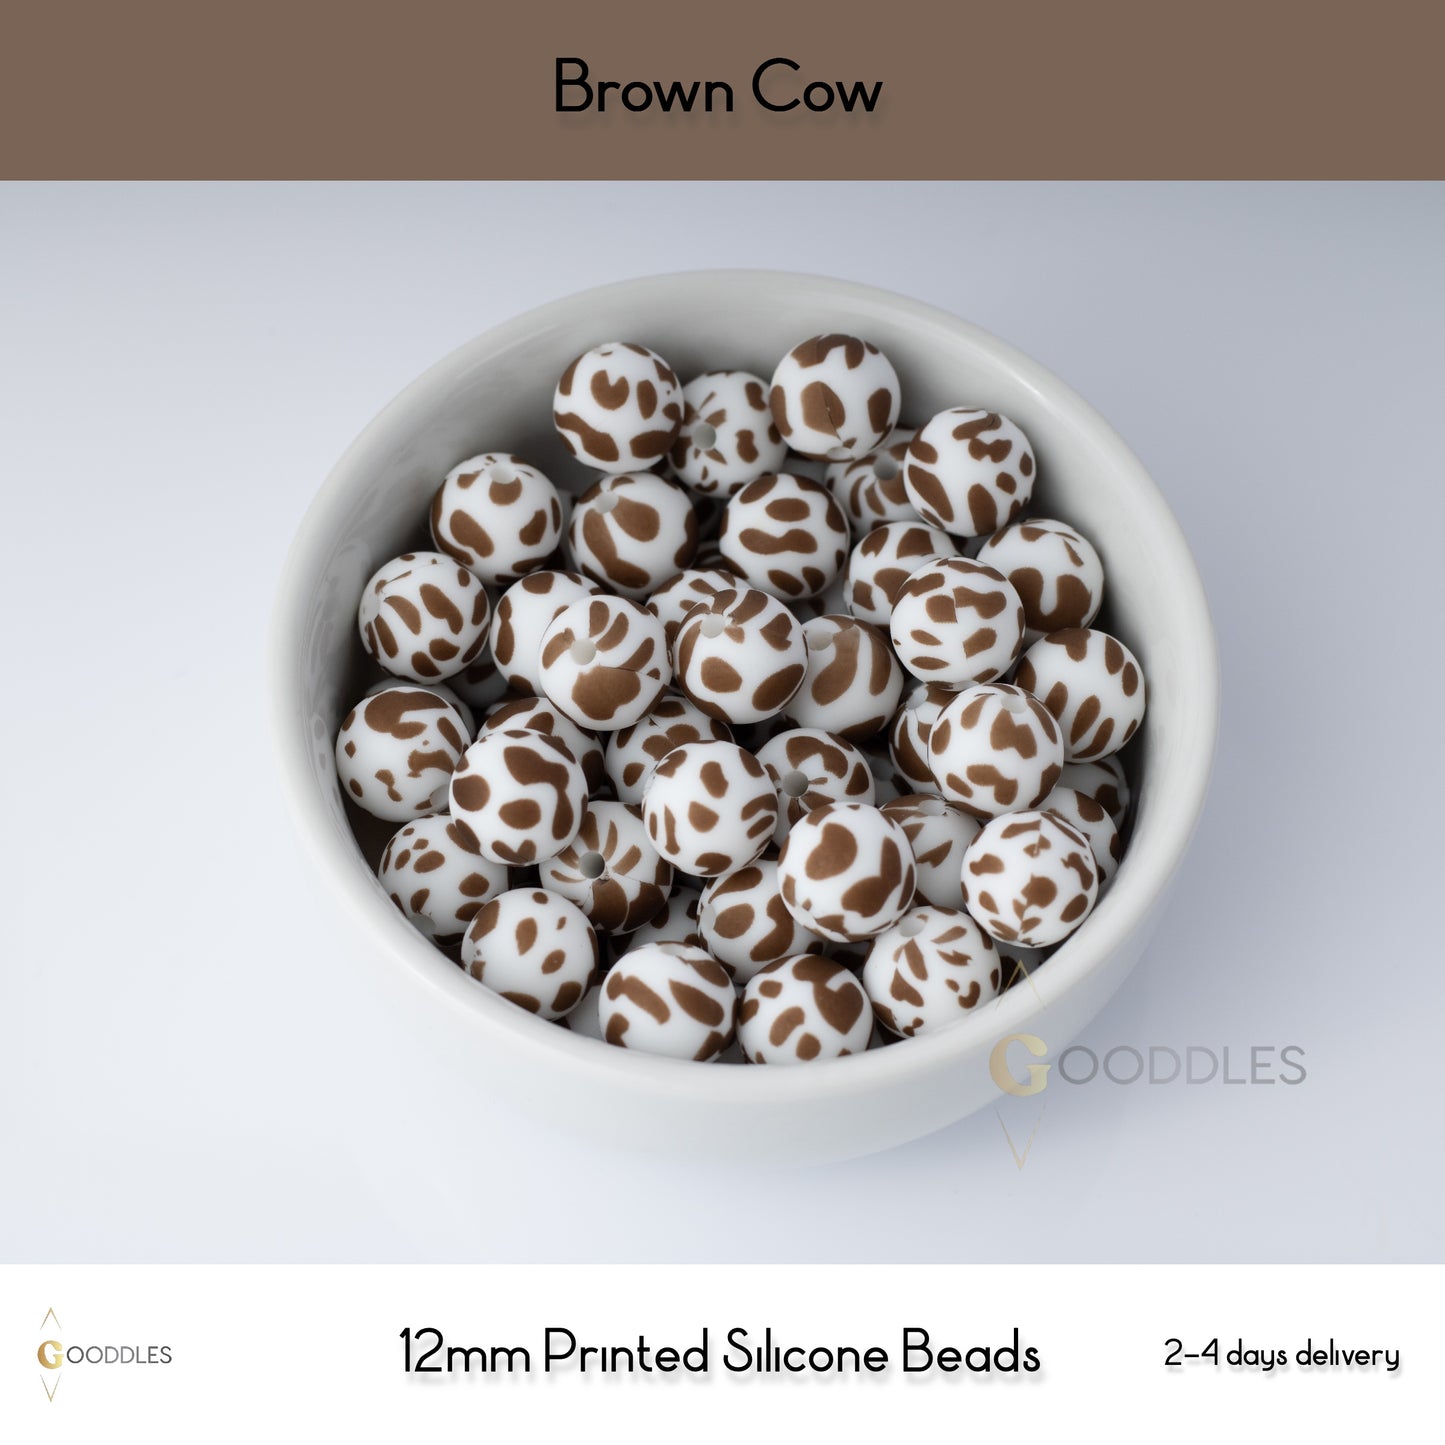 5pcs, Brown Cow Silicone Beads Printed Round Silicone Beads